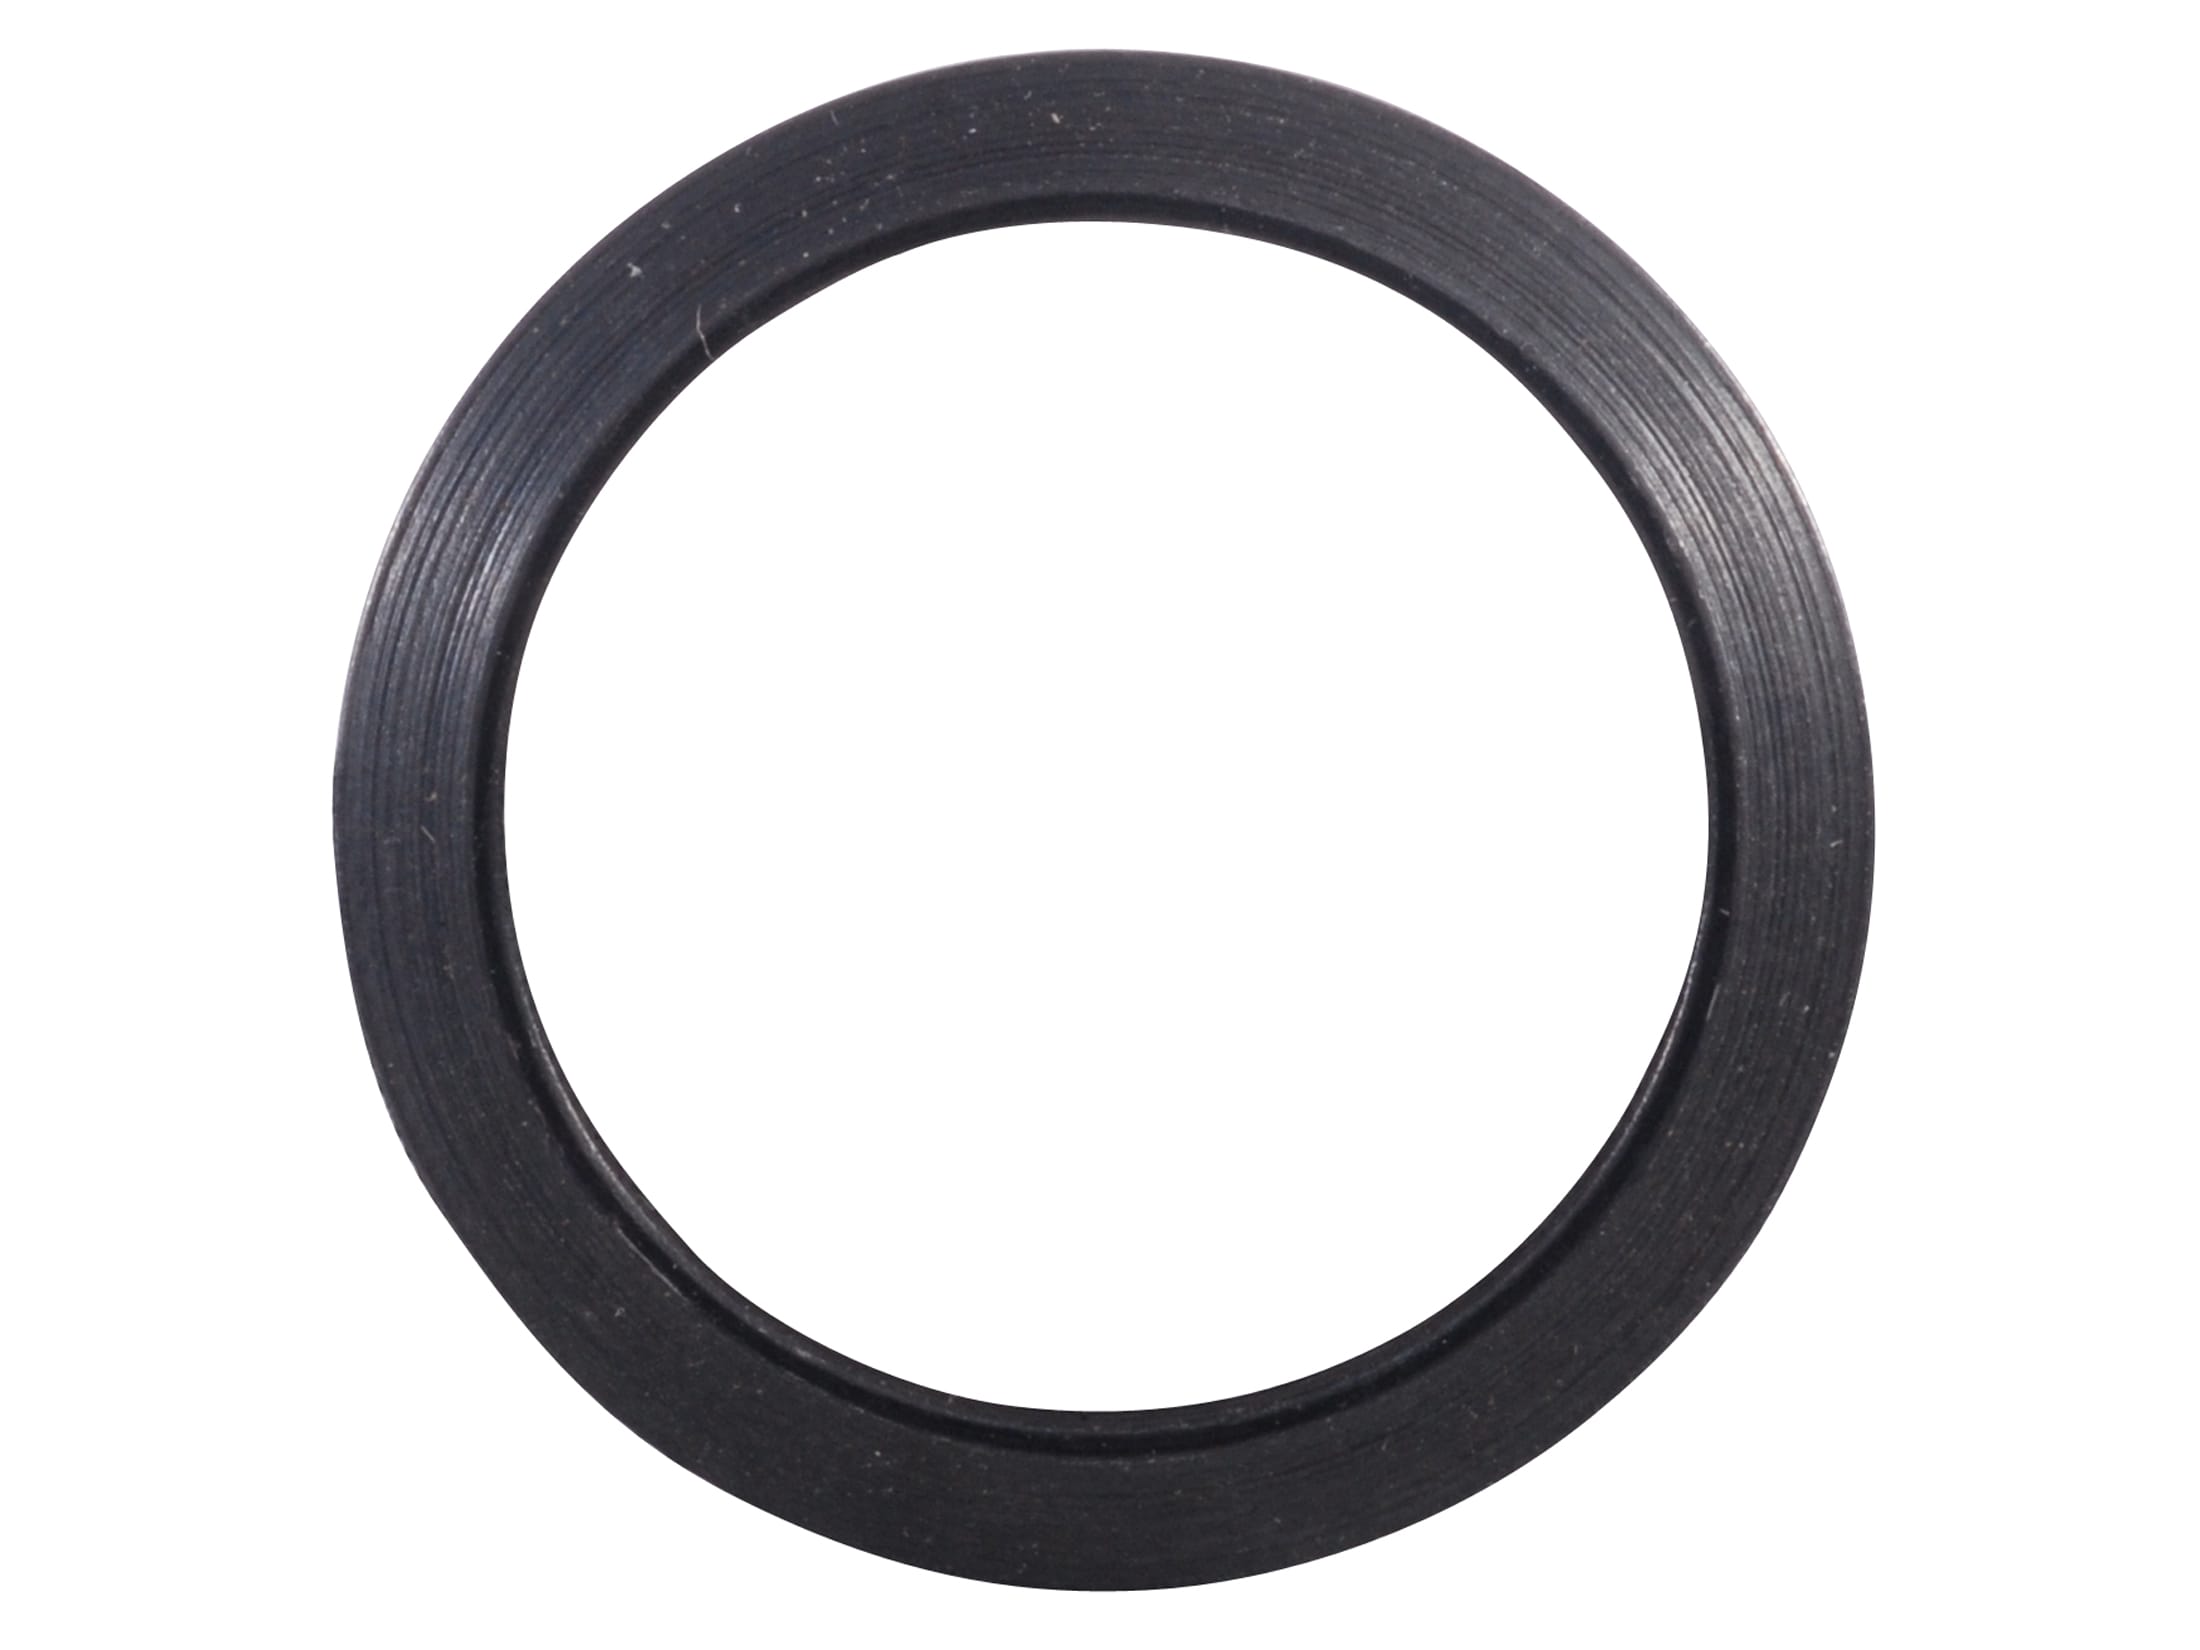 Black MADE IN USA ONE 5/8" Crush Washer for .30/.308/7.62 